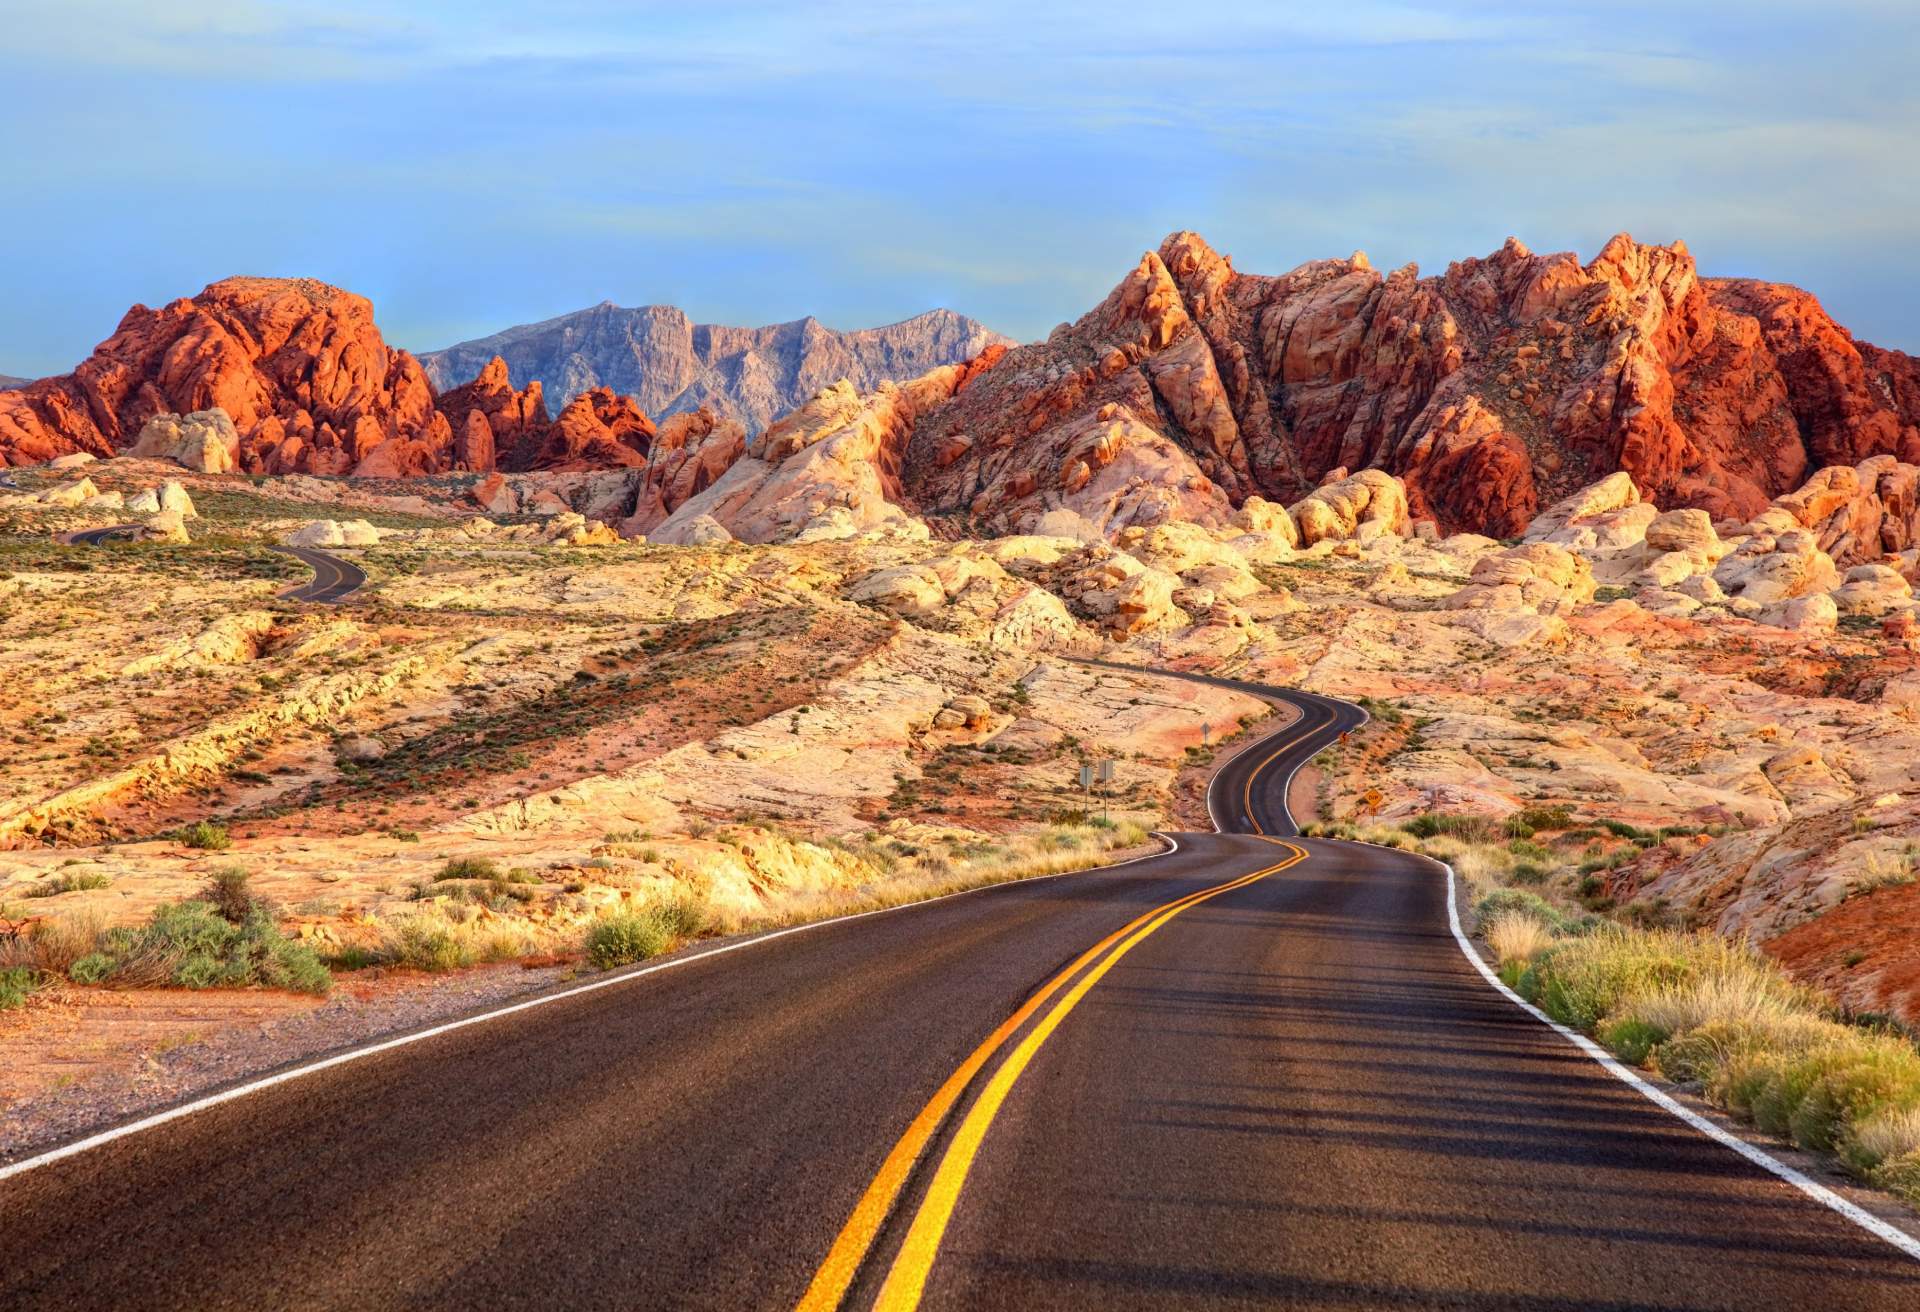 Winding roads weave through red sandstone under a clear blue sky in Valley of Fire, Nevada 